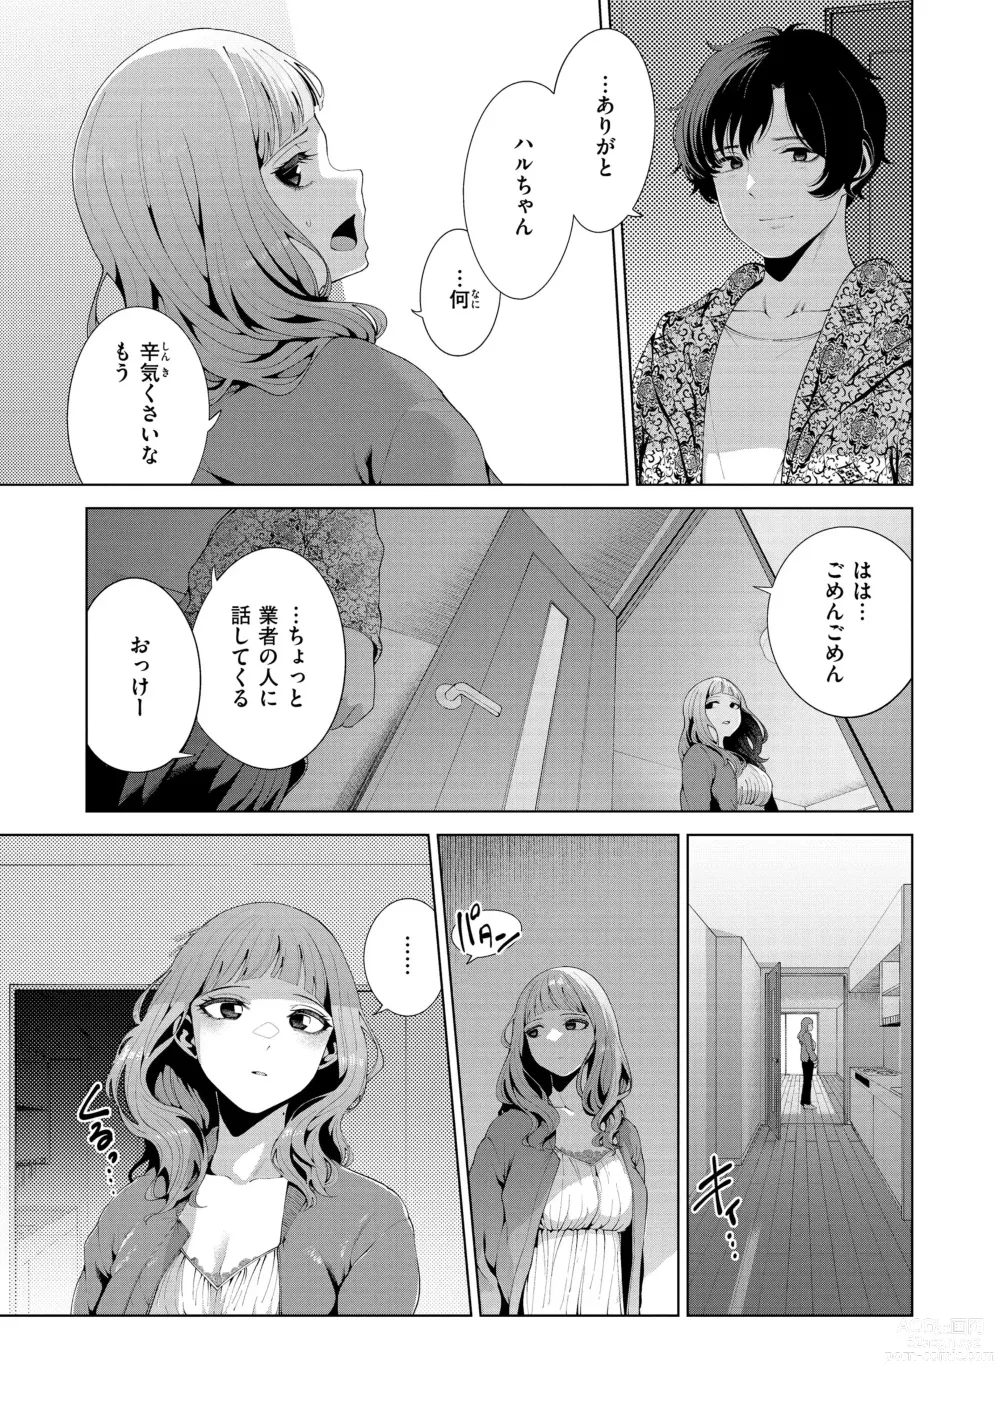 Page 11 of manga Watashi de Sometai - Dyed with Your Color.